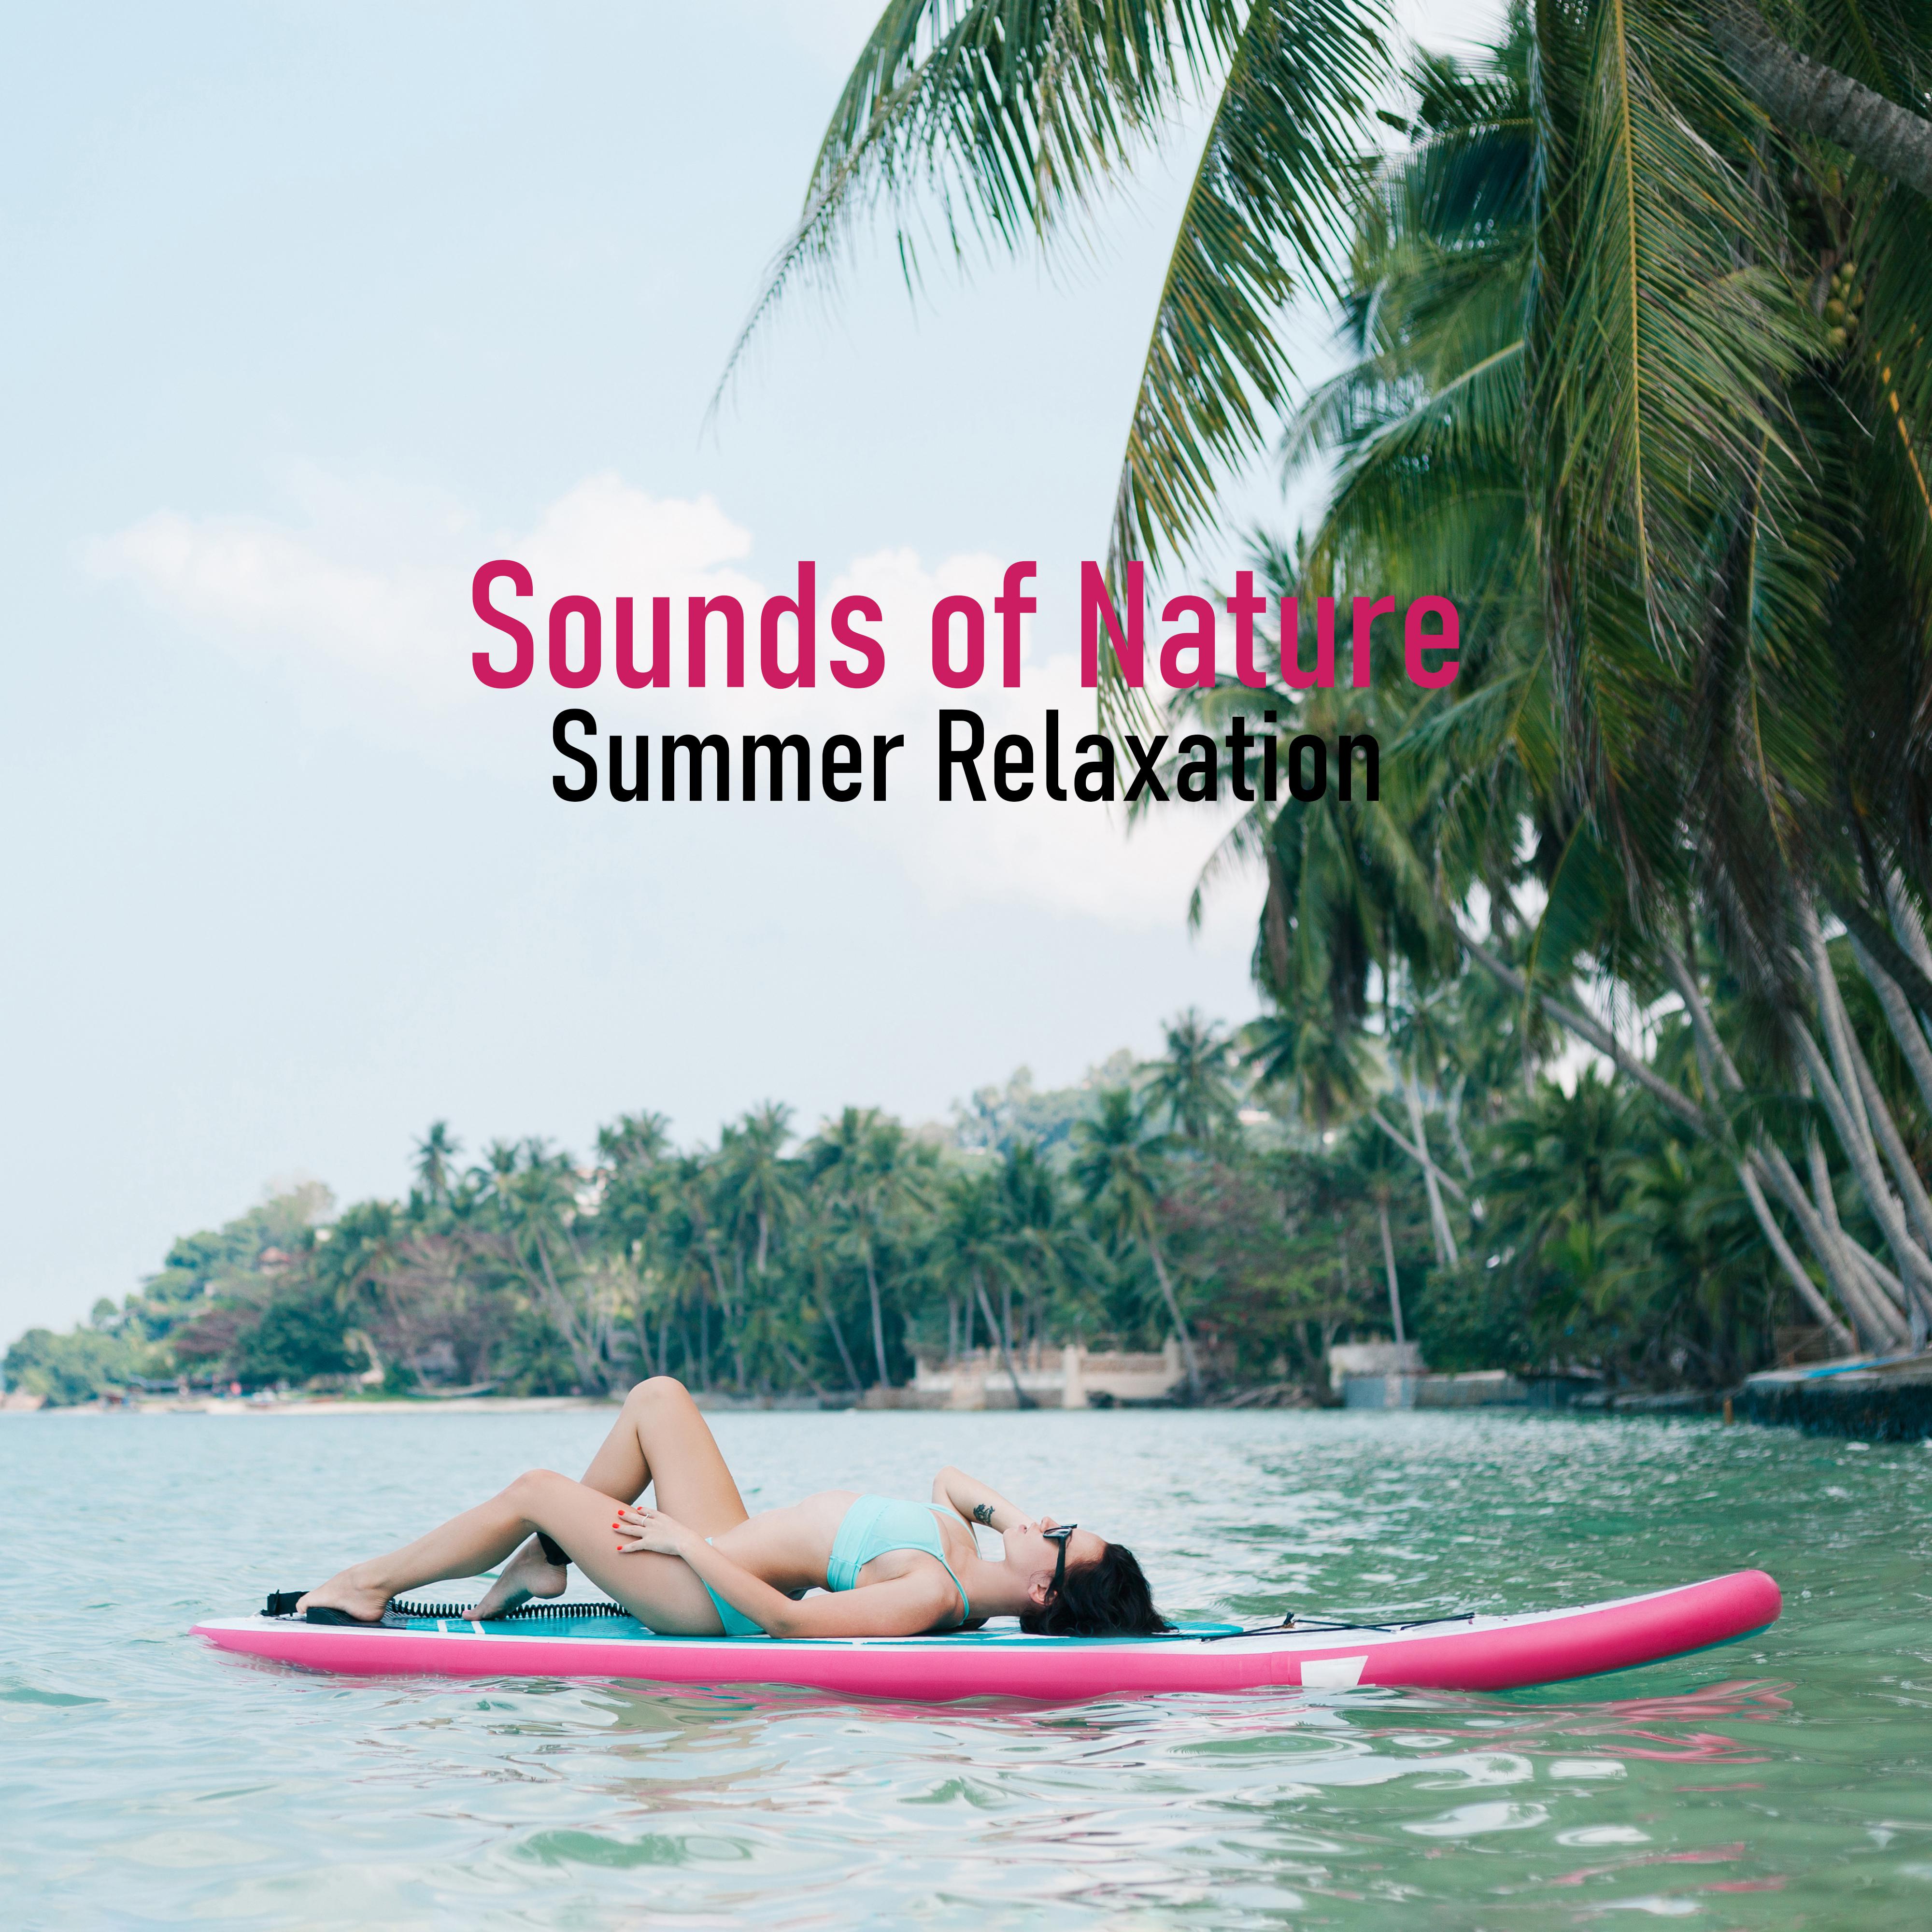 Sounds of Nature Summer Relaxation: 2019 Nature New Age Music, Most Relaxing Piano Melodies with Soothing Sounds of Birds, Forest, Meadow, Sea, Rain, Water Stream, Calming Down, Rest & Relax, Anti-stress